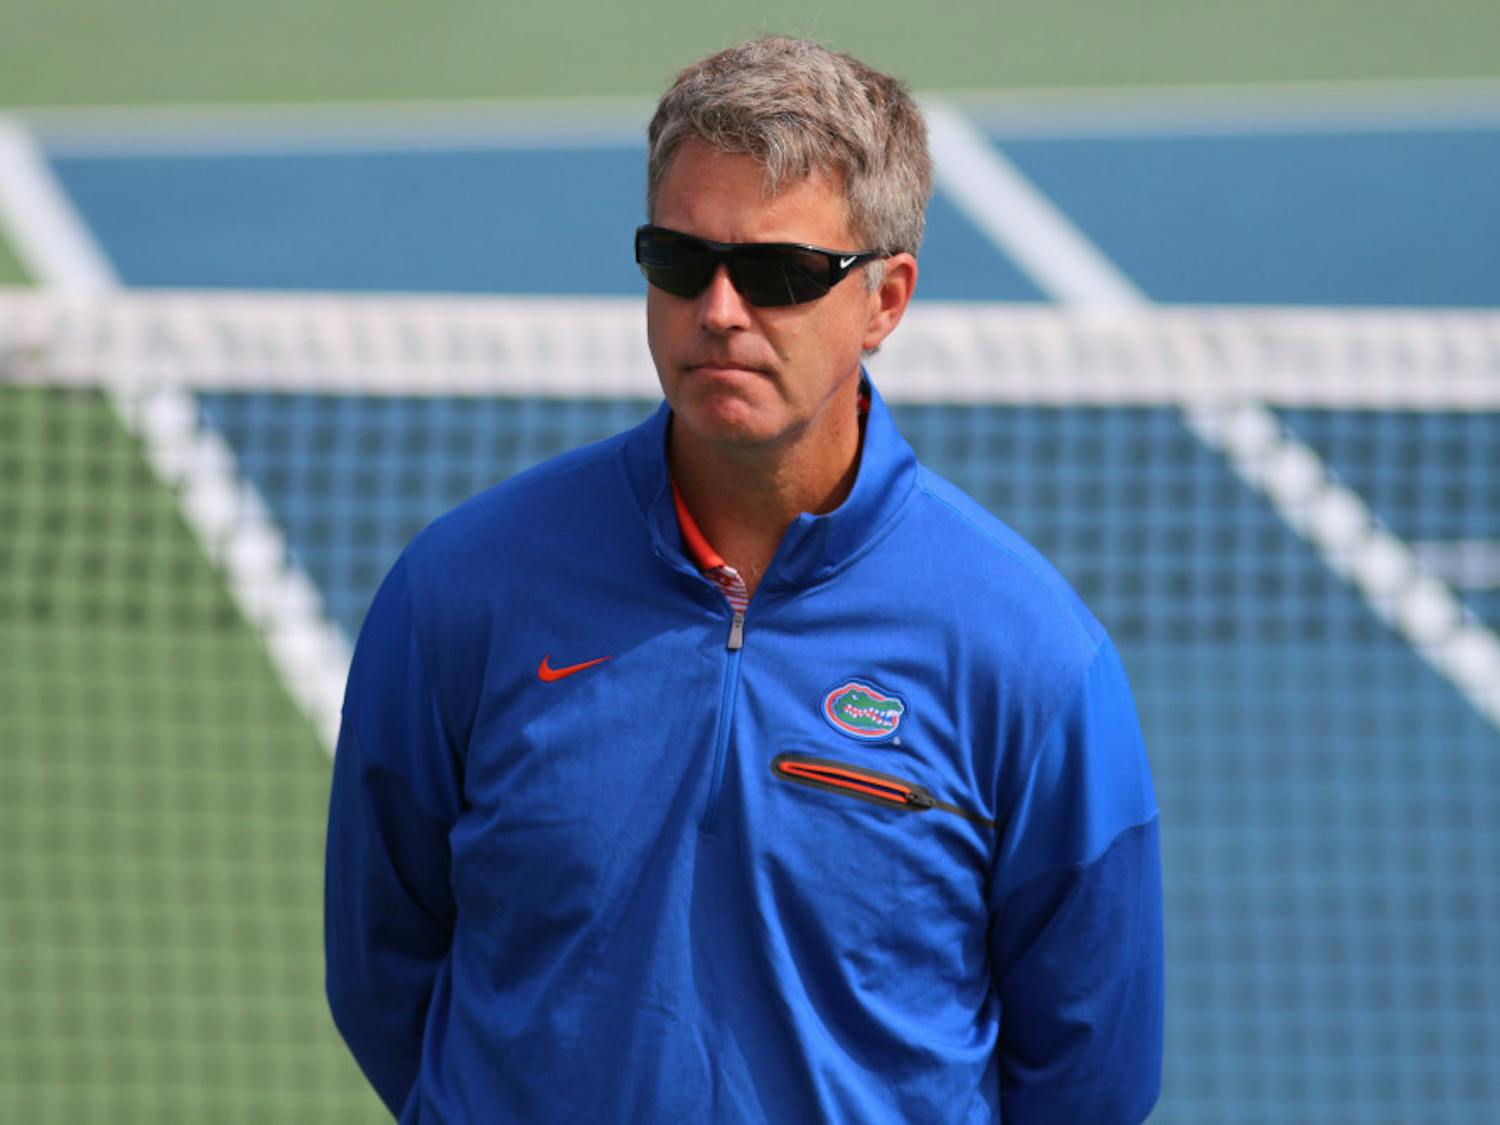 UF women's tennis coach Roland Thornqvist said Monday's 4-3 loss to North Carolina State will make his team better in the future. “This is the first time competing at a level like this for a lot of them and it is going to take getting used to,” he said.